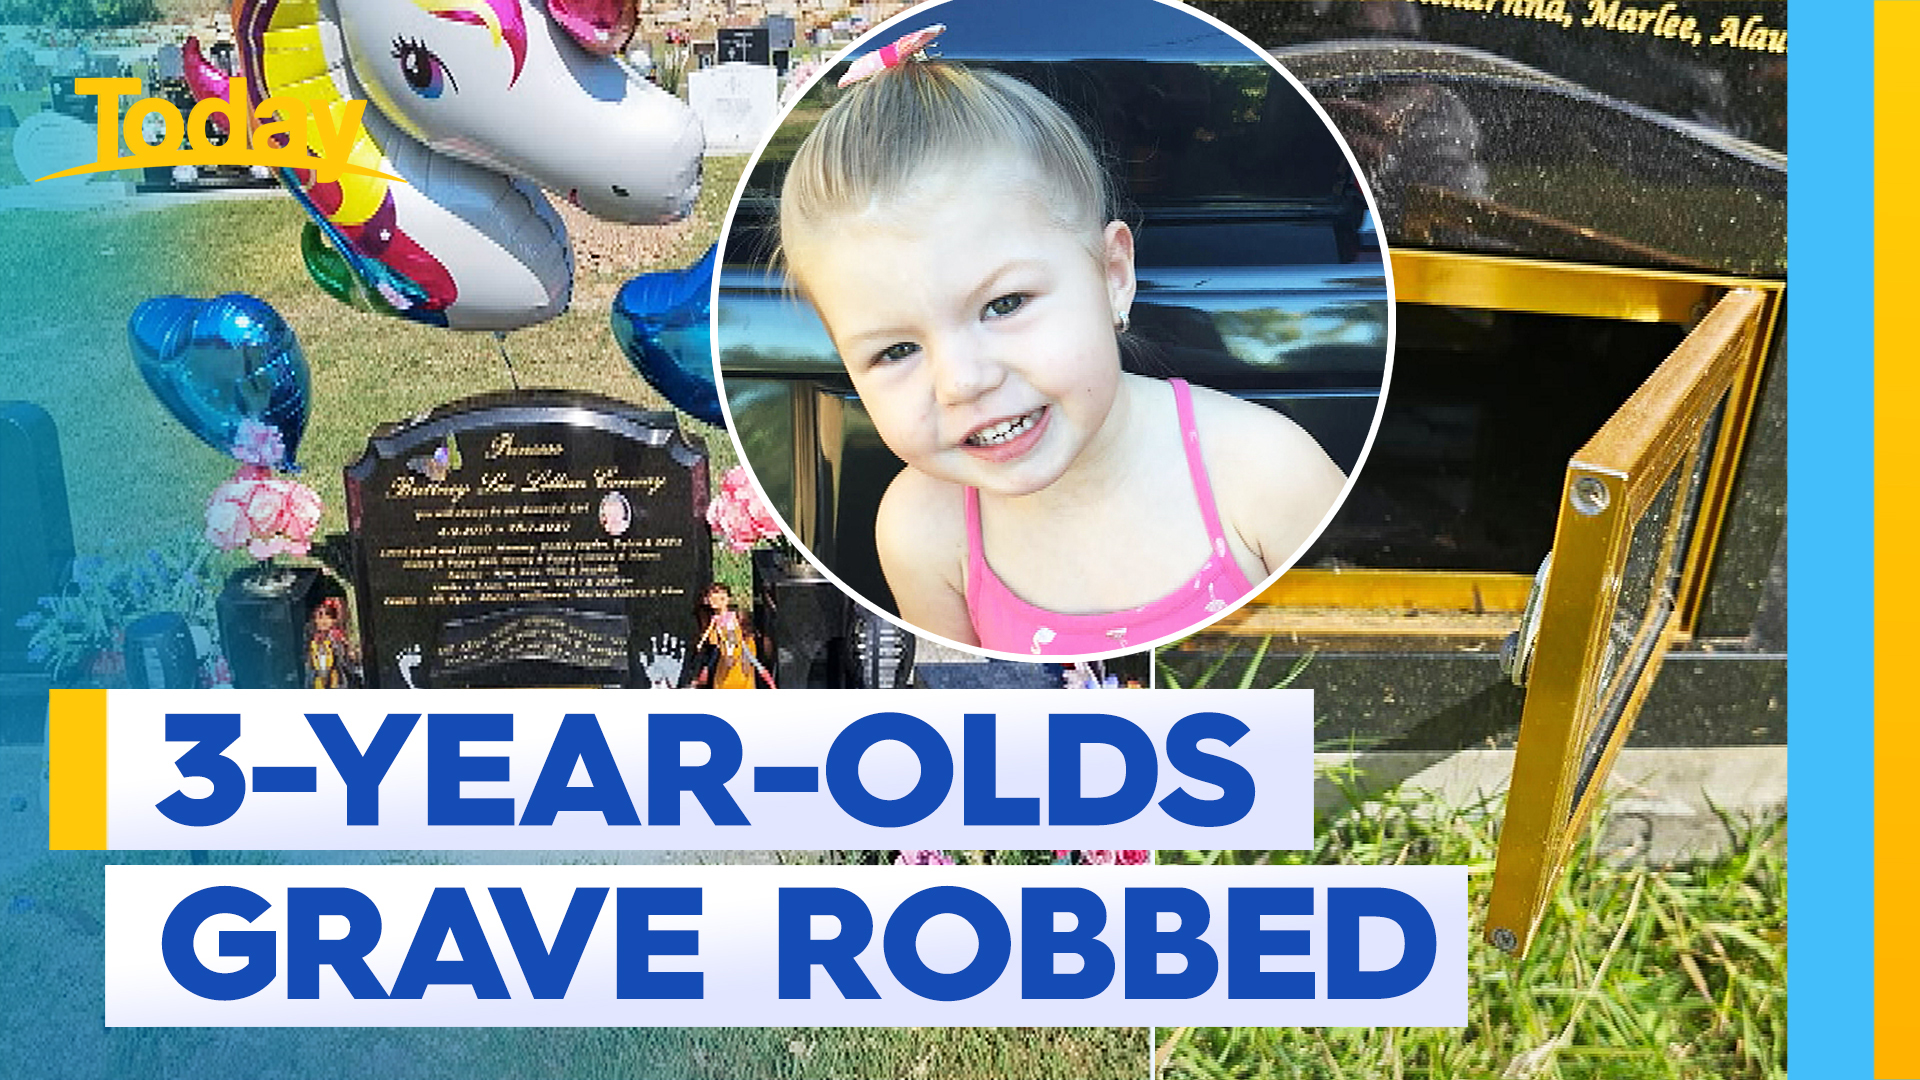 Parents heartbroken after tiara stolen from three-year-old's grave